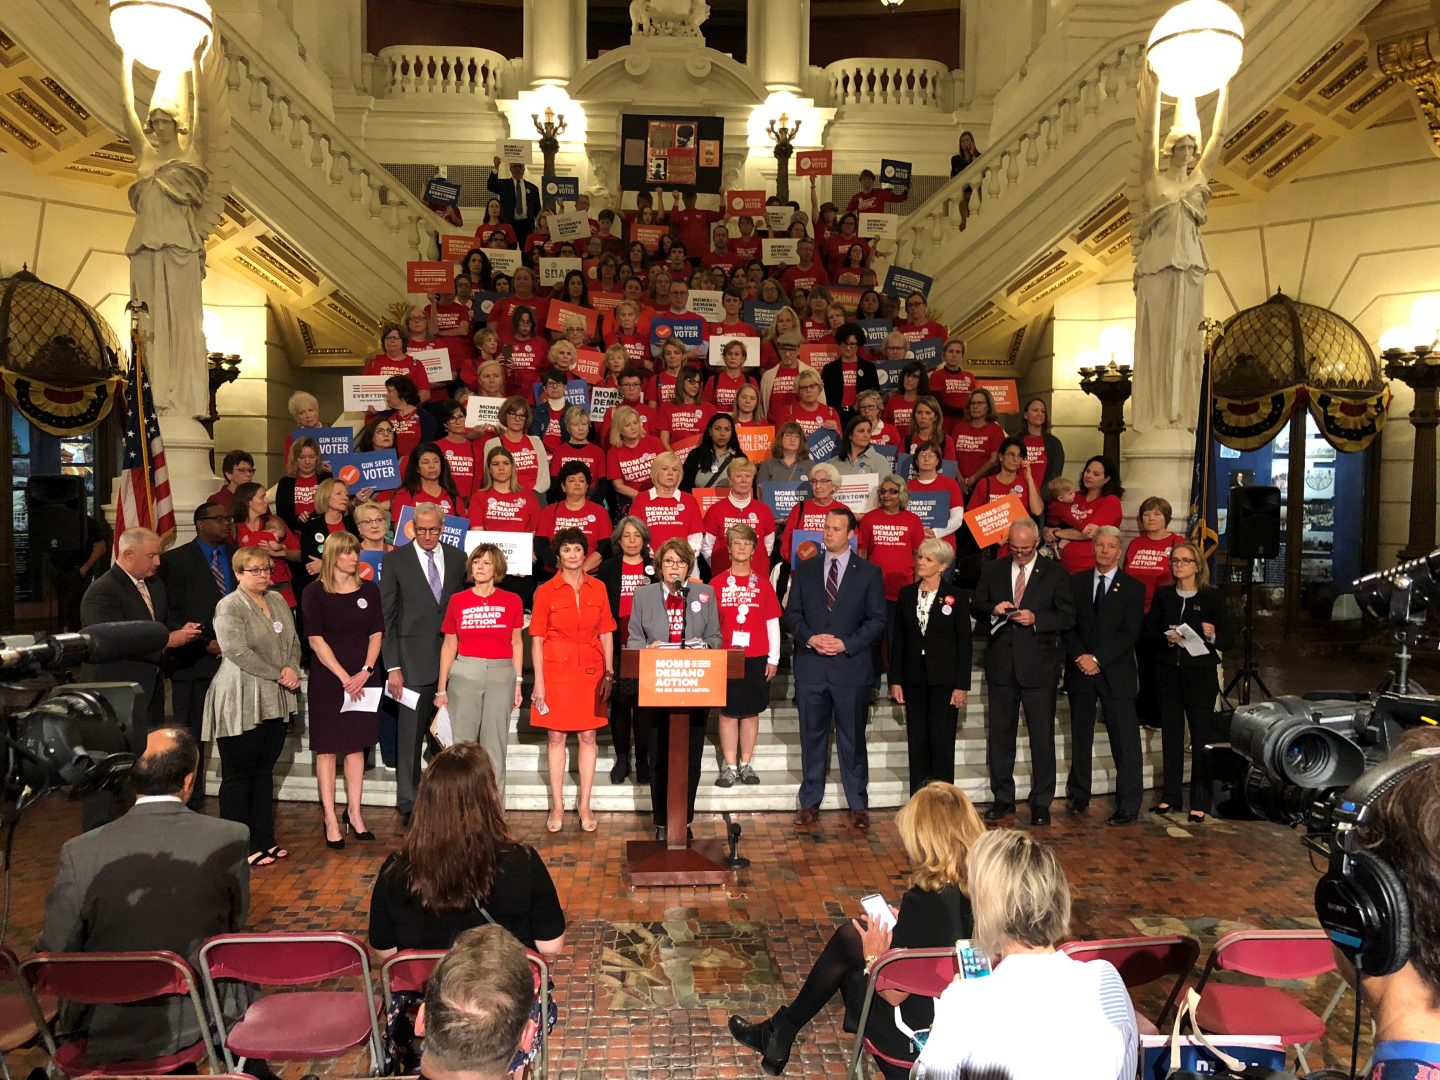 Supporters of legislation to increase gun restrictions in protection-from-abuse and domestic violence cases rally at the state Capitol in Harrisburg on Sept. 24, 2018.